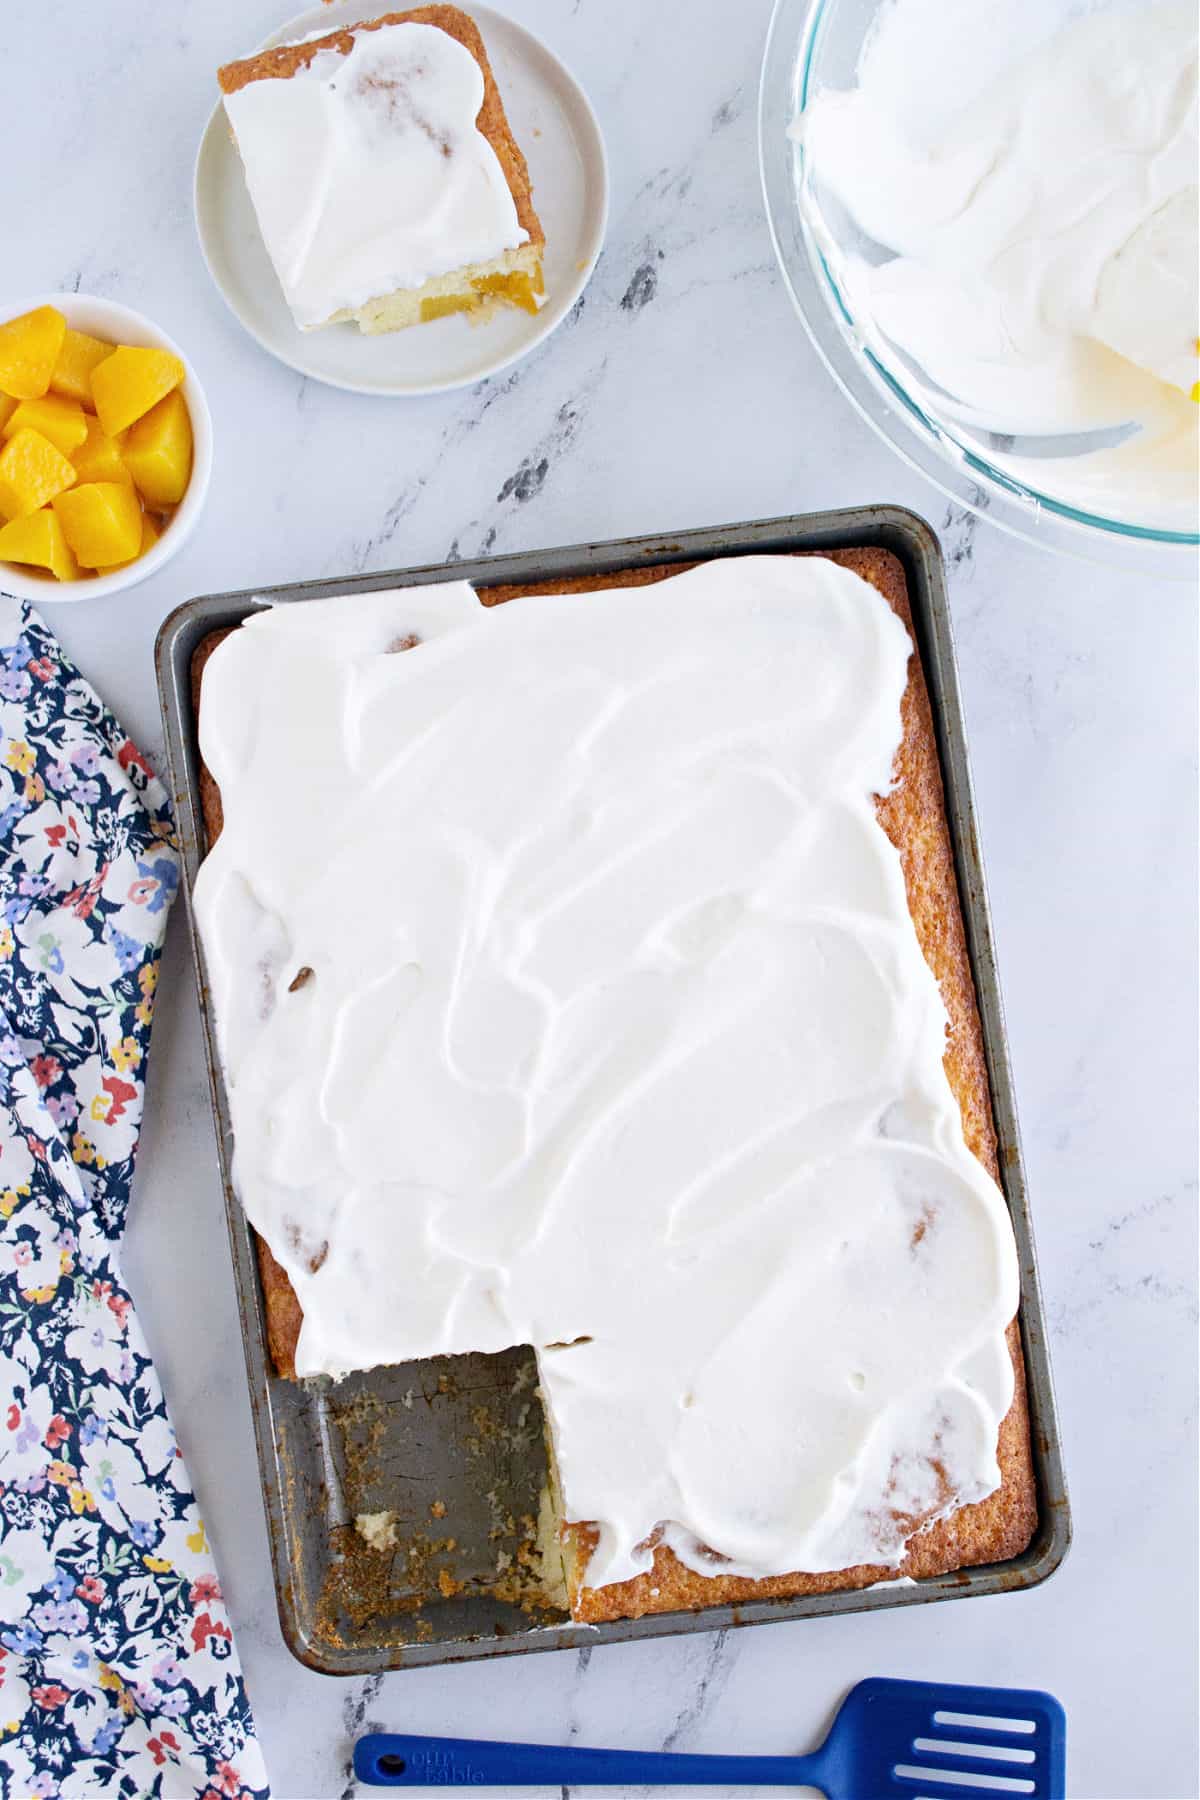 Peach cake topped with whipped cream in a 13x9 baking dish.